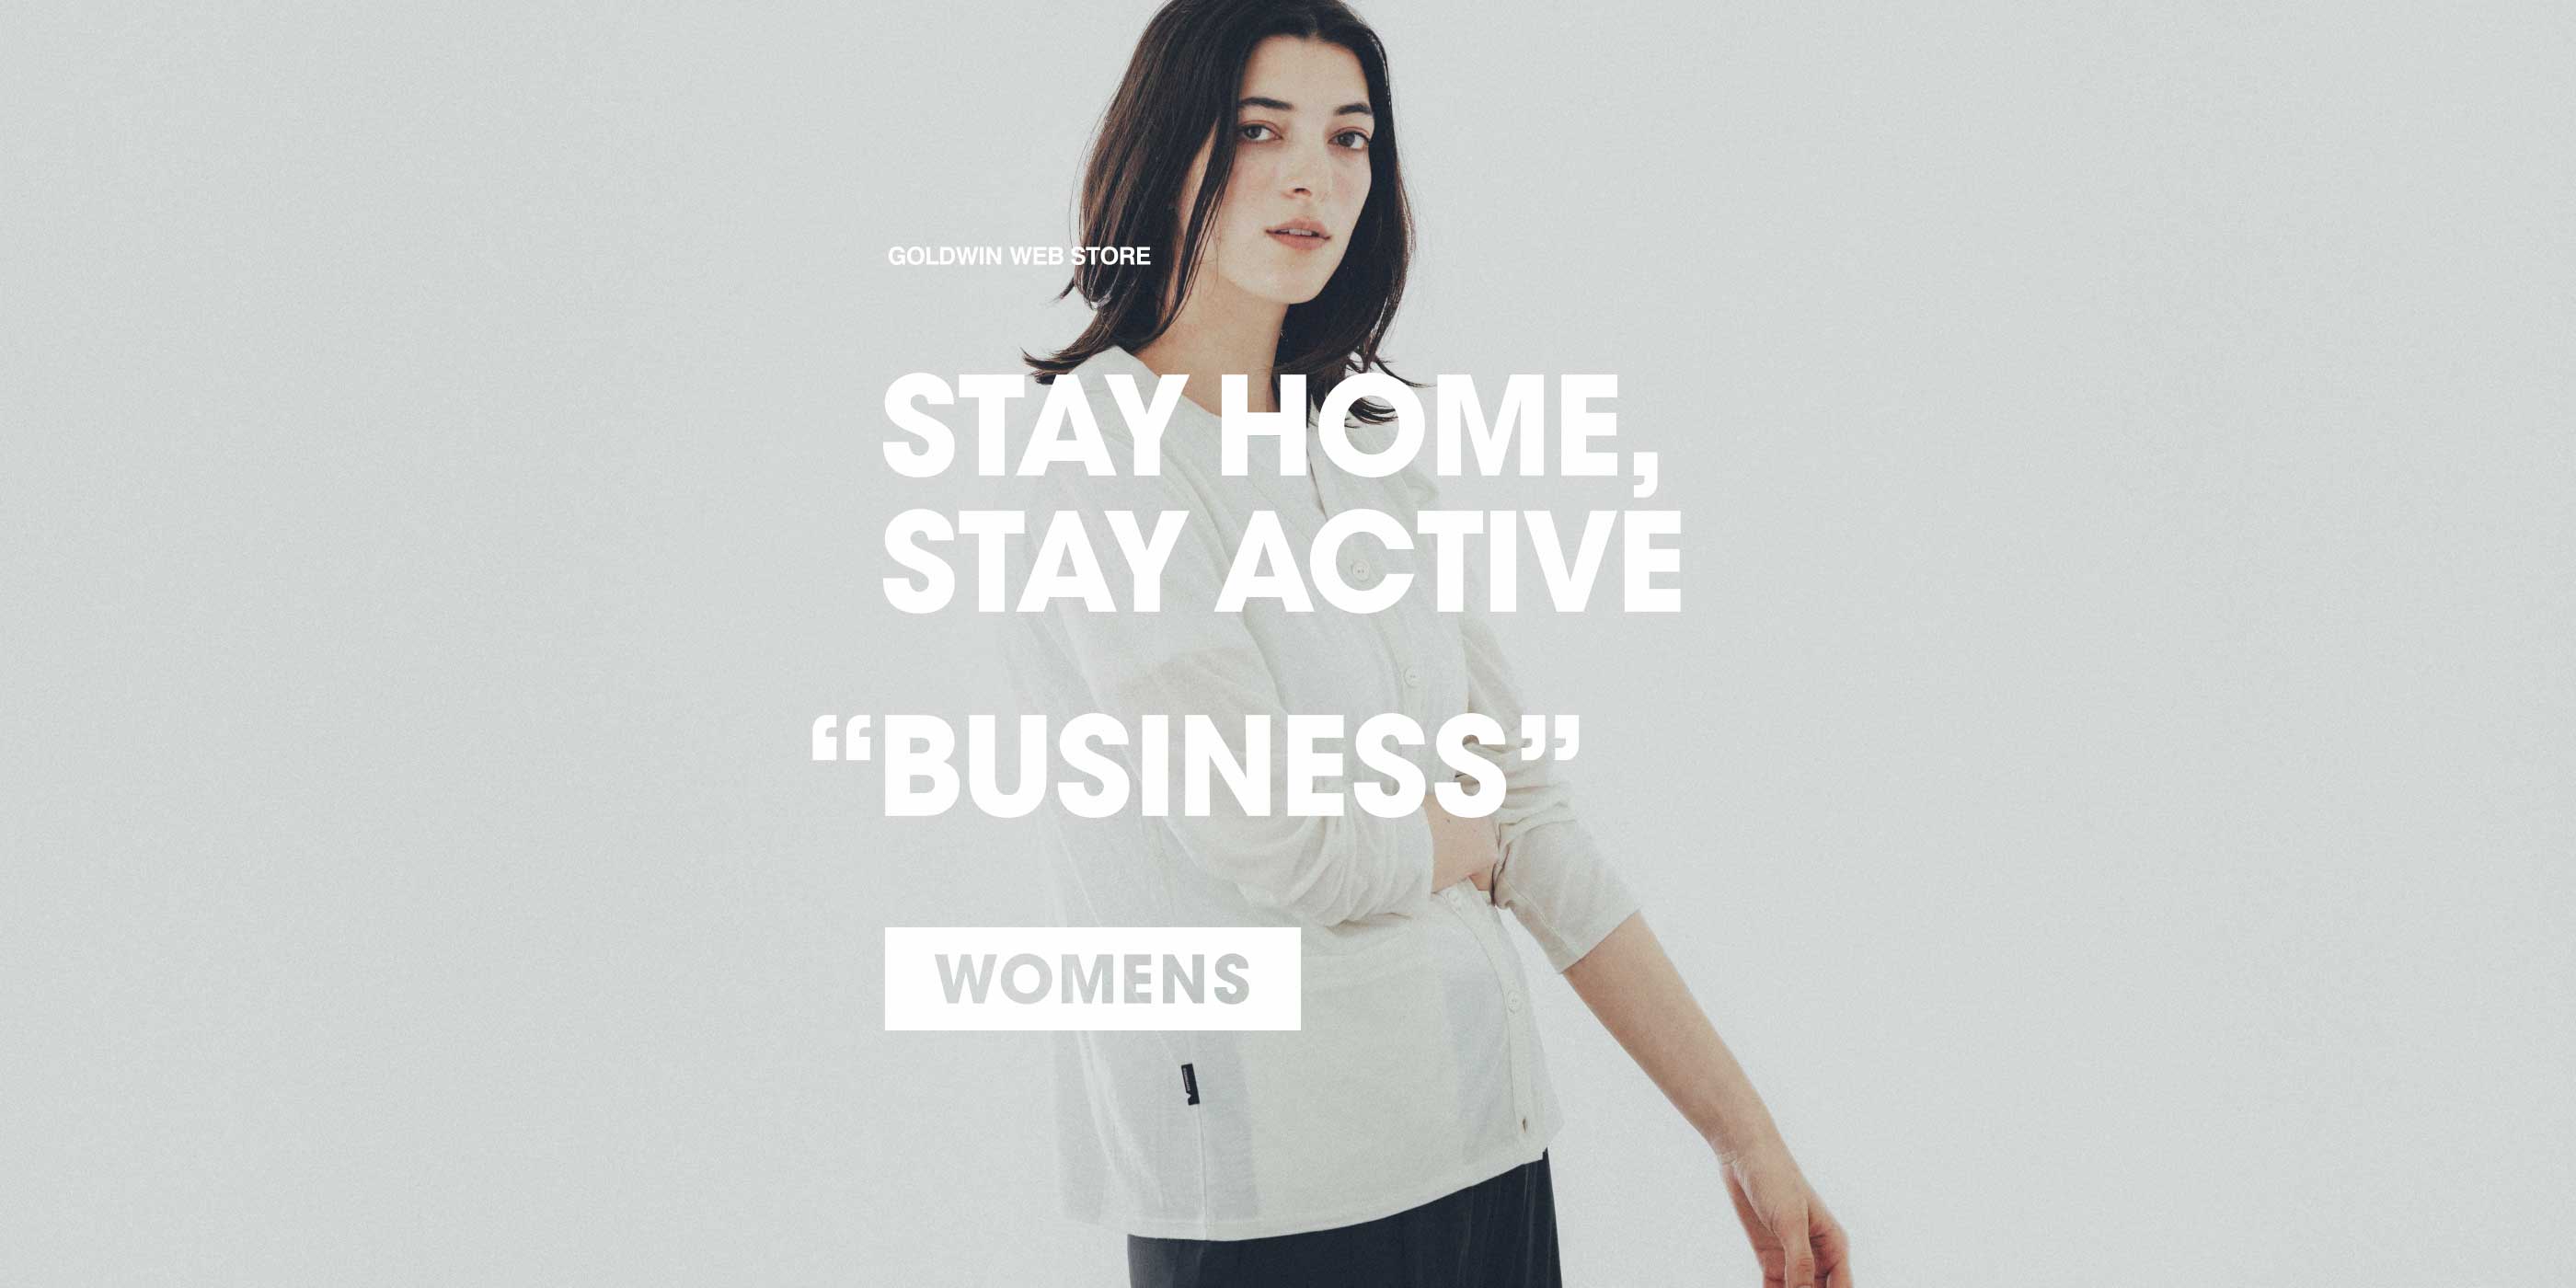 STAY HOME, STAY ACTIVE - BUSINESS - for WOMEN